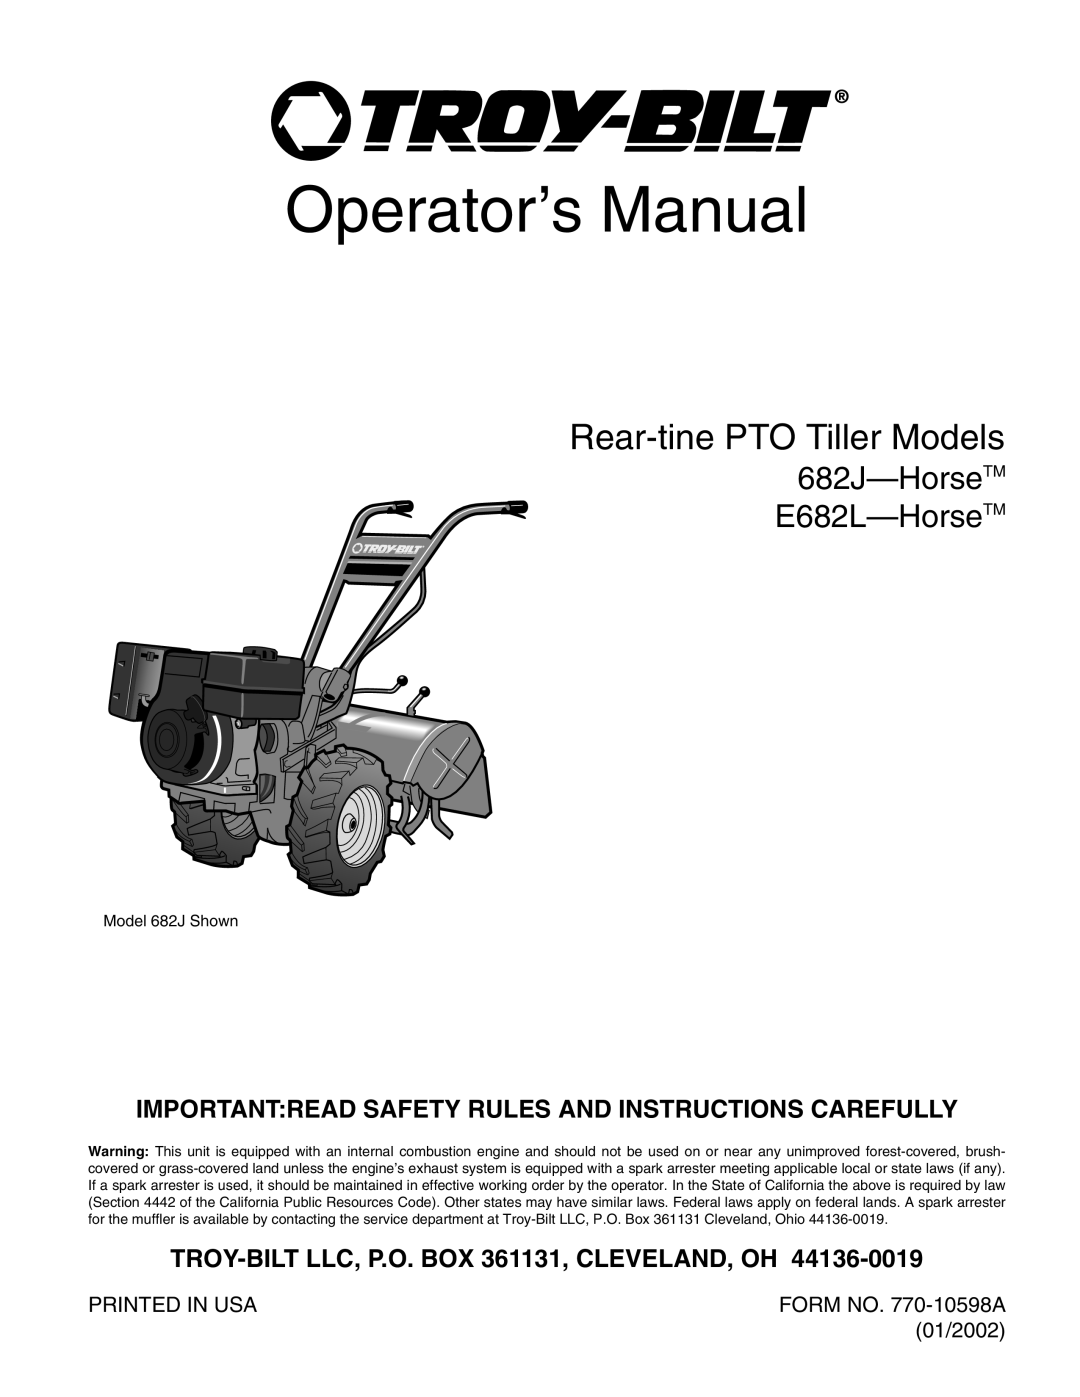 Troy-Bilt E682J-Horse manual Importantread Safety Rules And Instructions Carefully, Printed In Usa, FORM NO. 770-10598A 